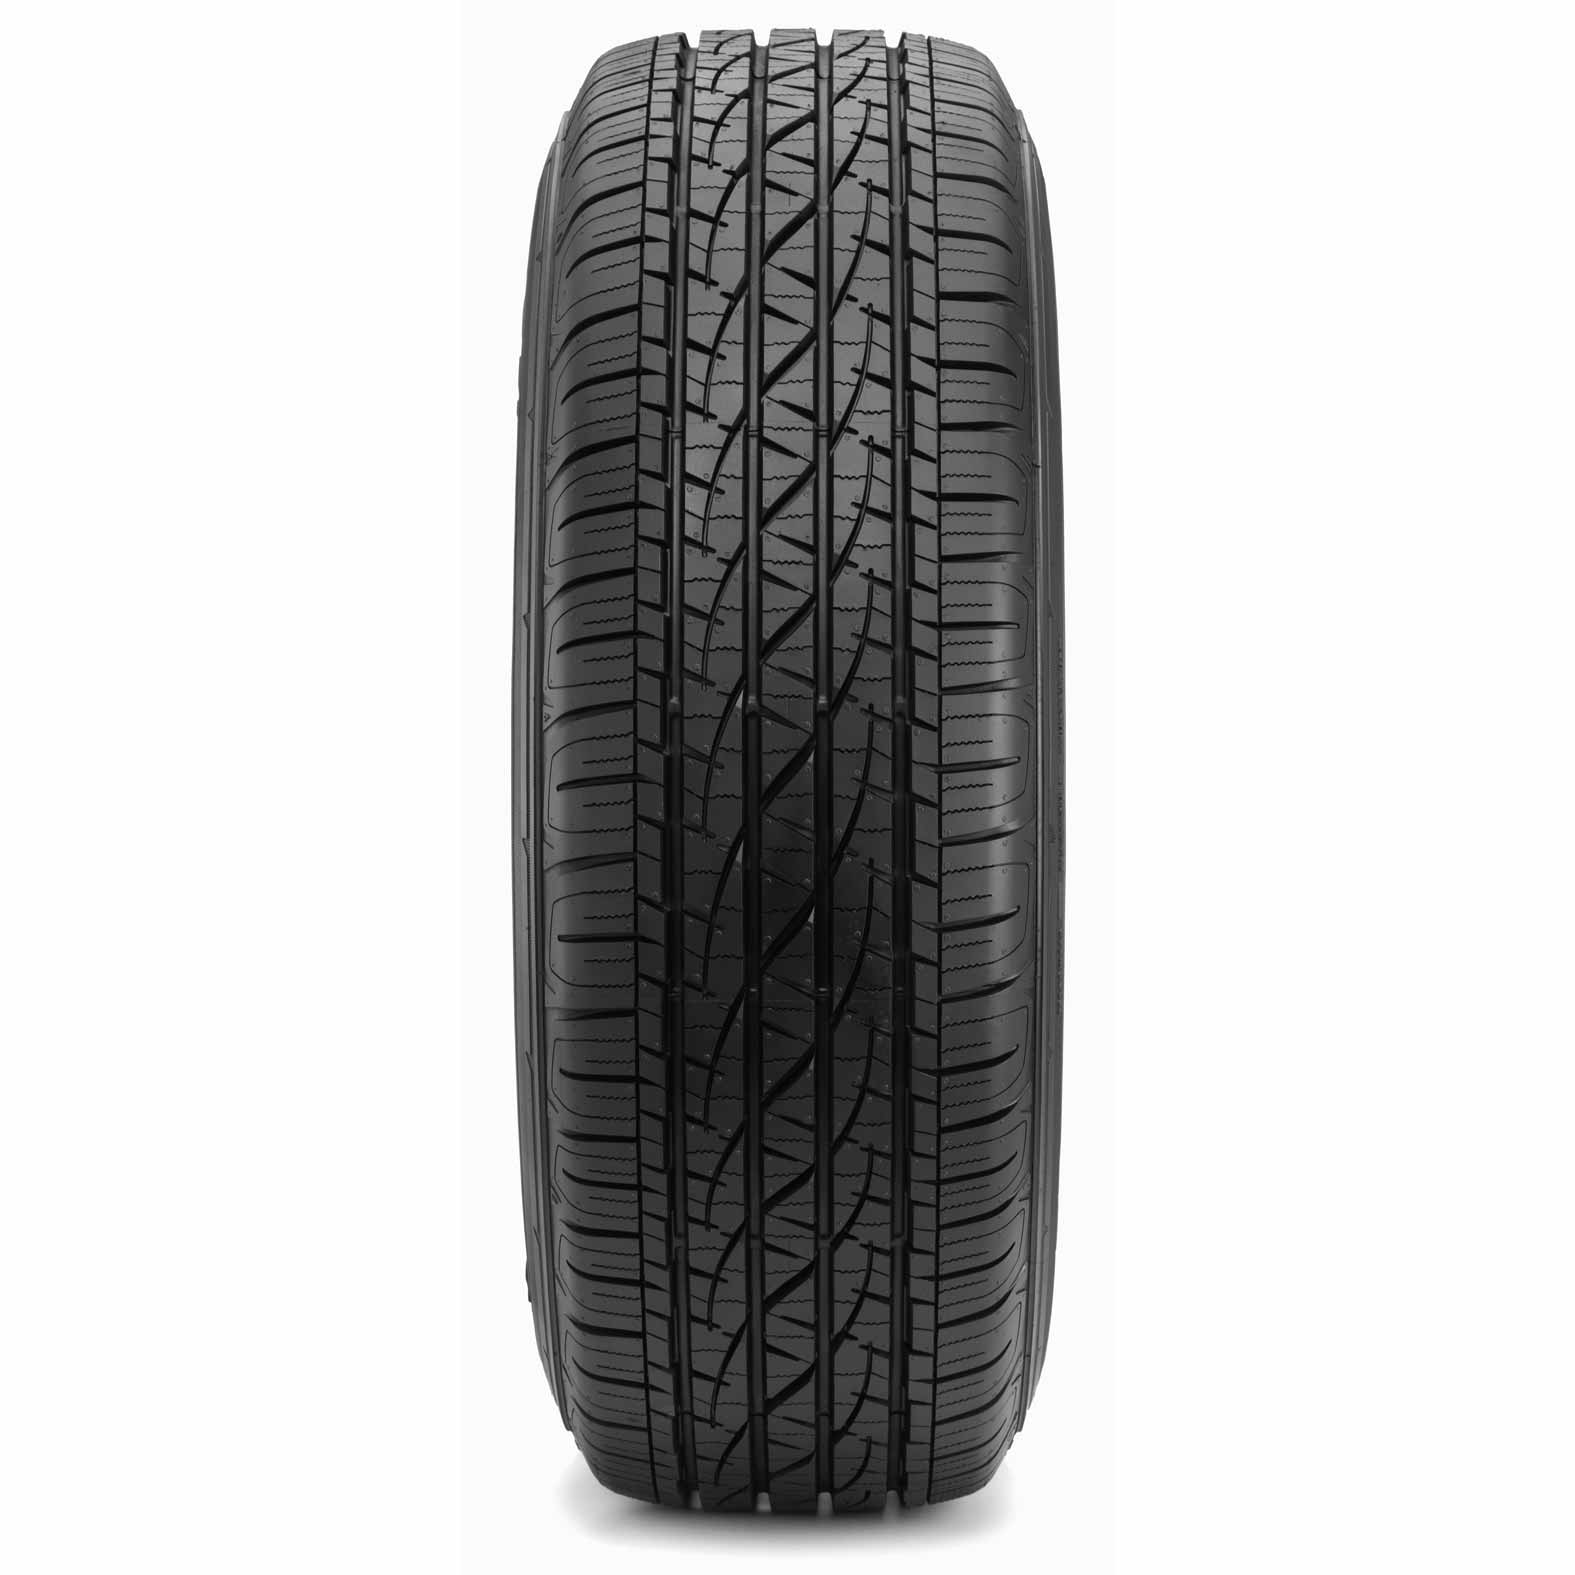 are-atlas-tires-any-good-for-my-car-or-truck-auto-s-tires